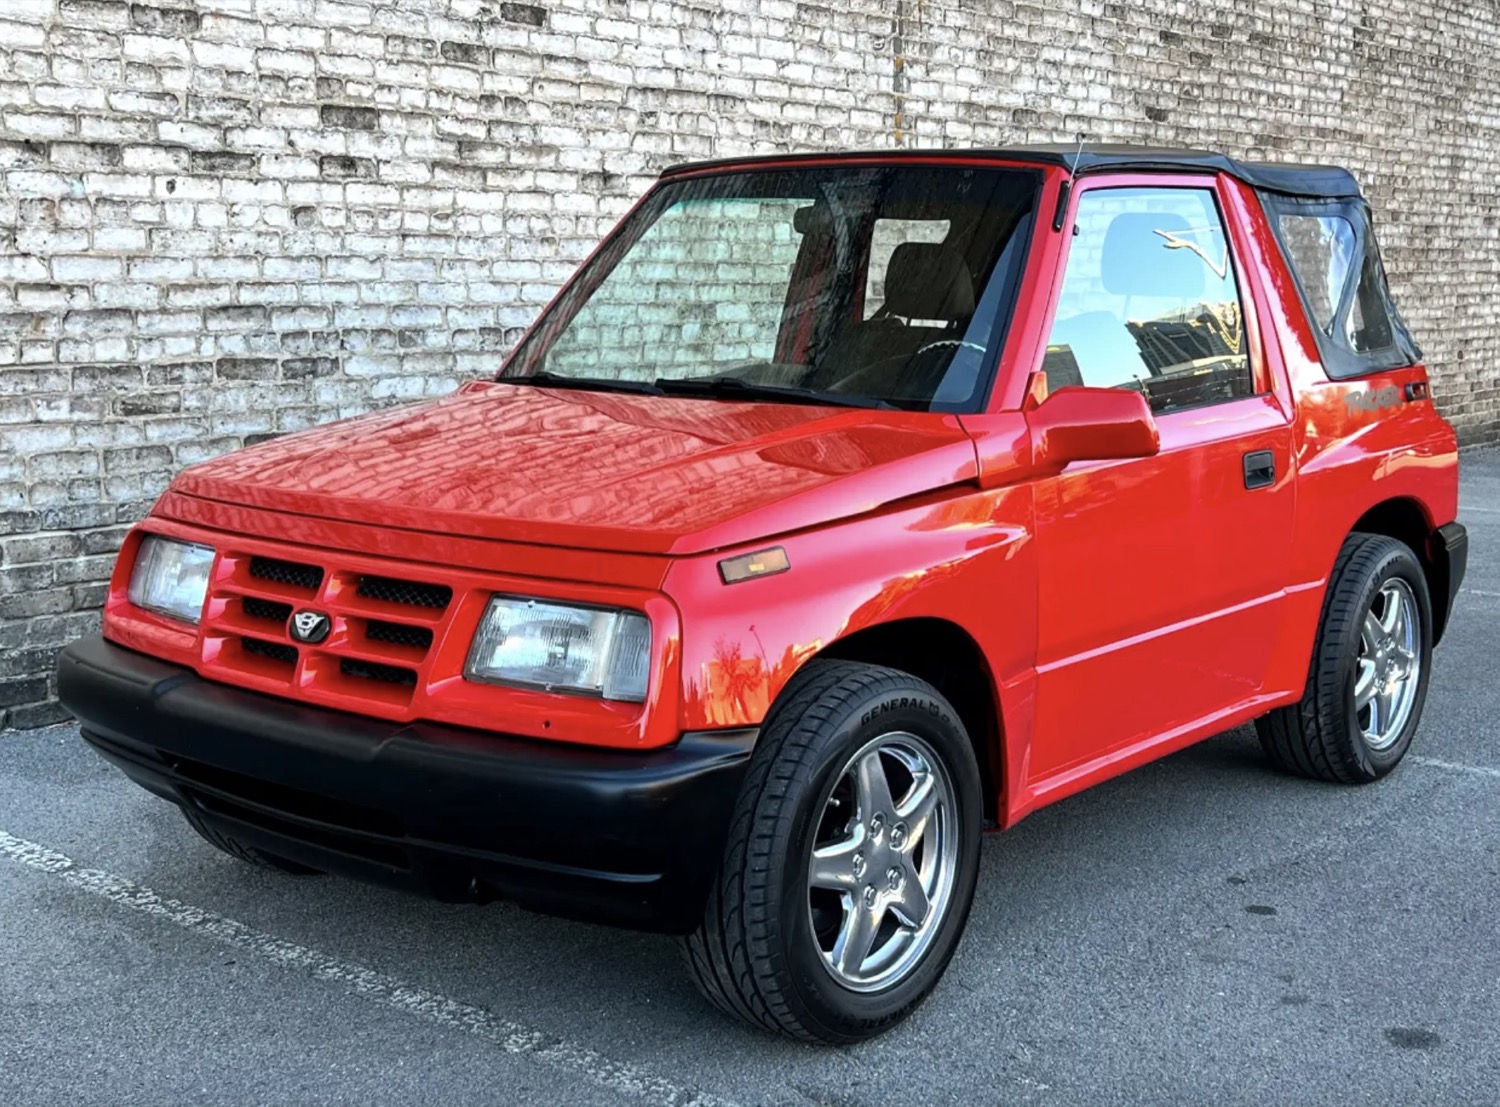 Ford V8-Powered 1996 Geo Tracker Up For Sale In Alabama